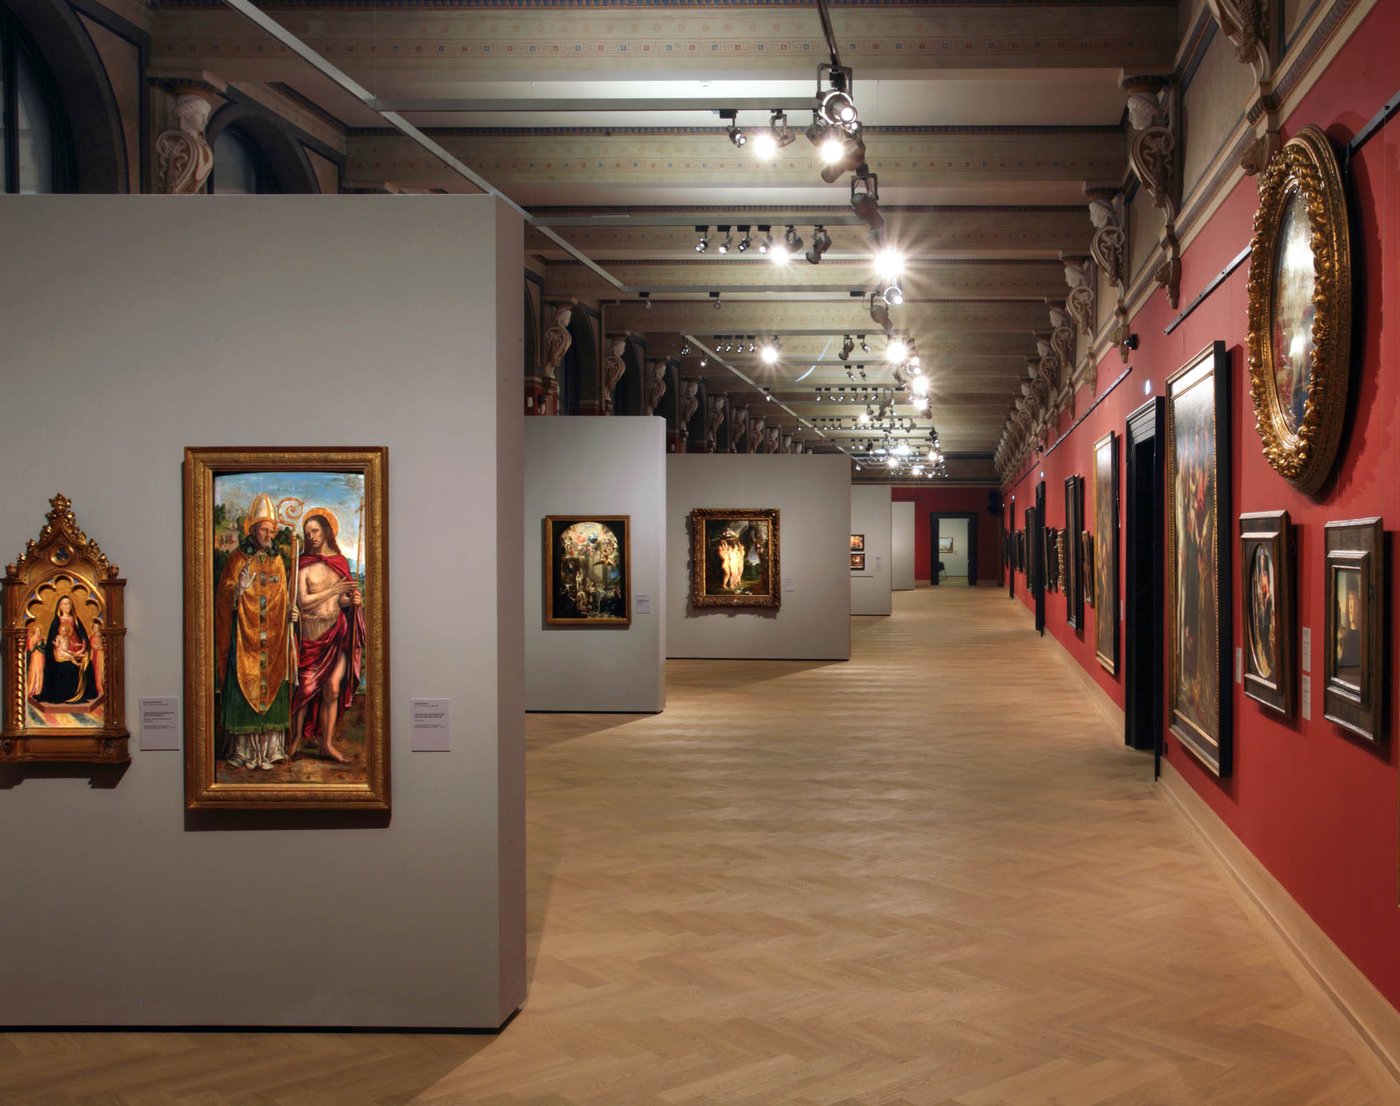 The photo shows one of the rooms of the Picture Gallery of the Academy of Fine Arts Vienna at the Schillerplatz. The room is long and tapered towards the back. There are reflectors on the ceiling which illuminate the individual paintings on the walls. On the right side is a long red wall with many pictures hanging next to and above each other. In the left half of the picture there are five grey partition walls parallel to each other, positioned at right angles to the wall on the left side. Paintings with golden frames are hanging on these walls as well. Between the parallel partitions and the right wall is a corridor leading to the door at the back.